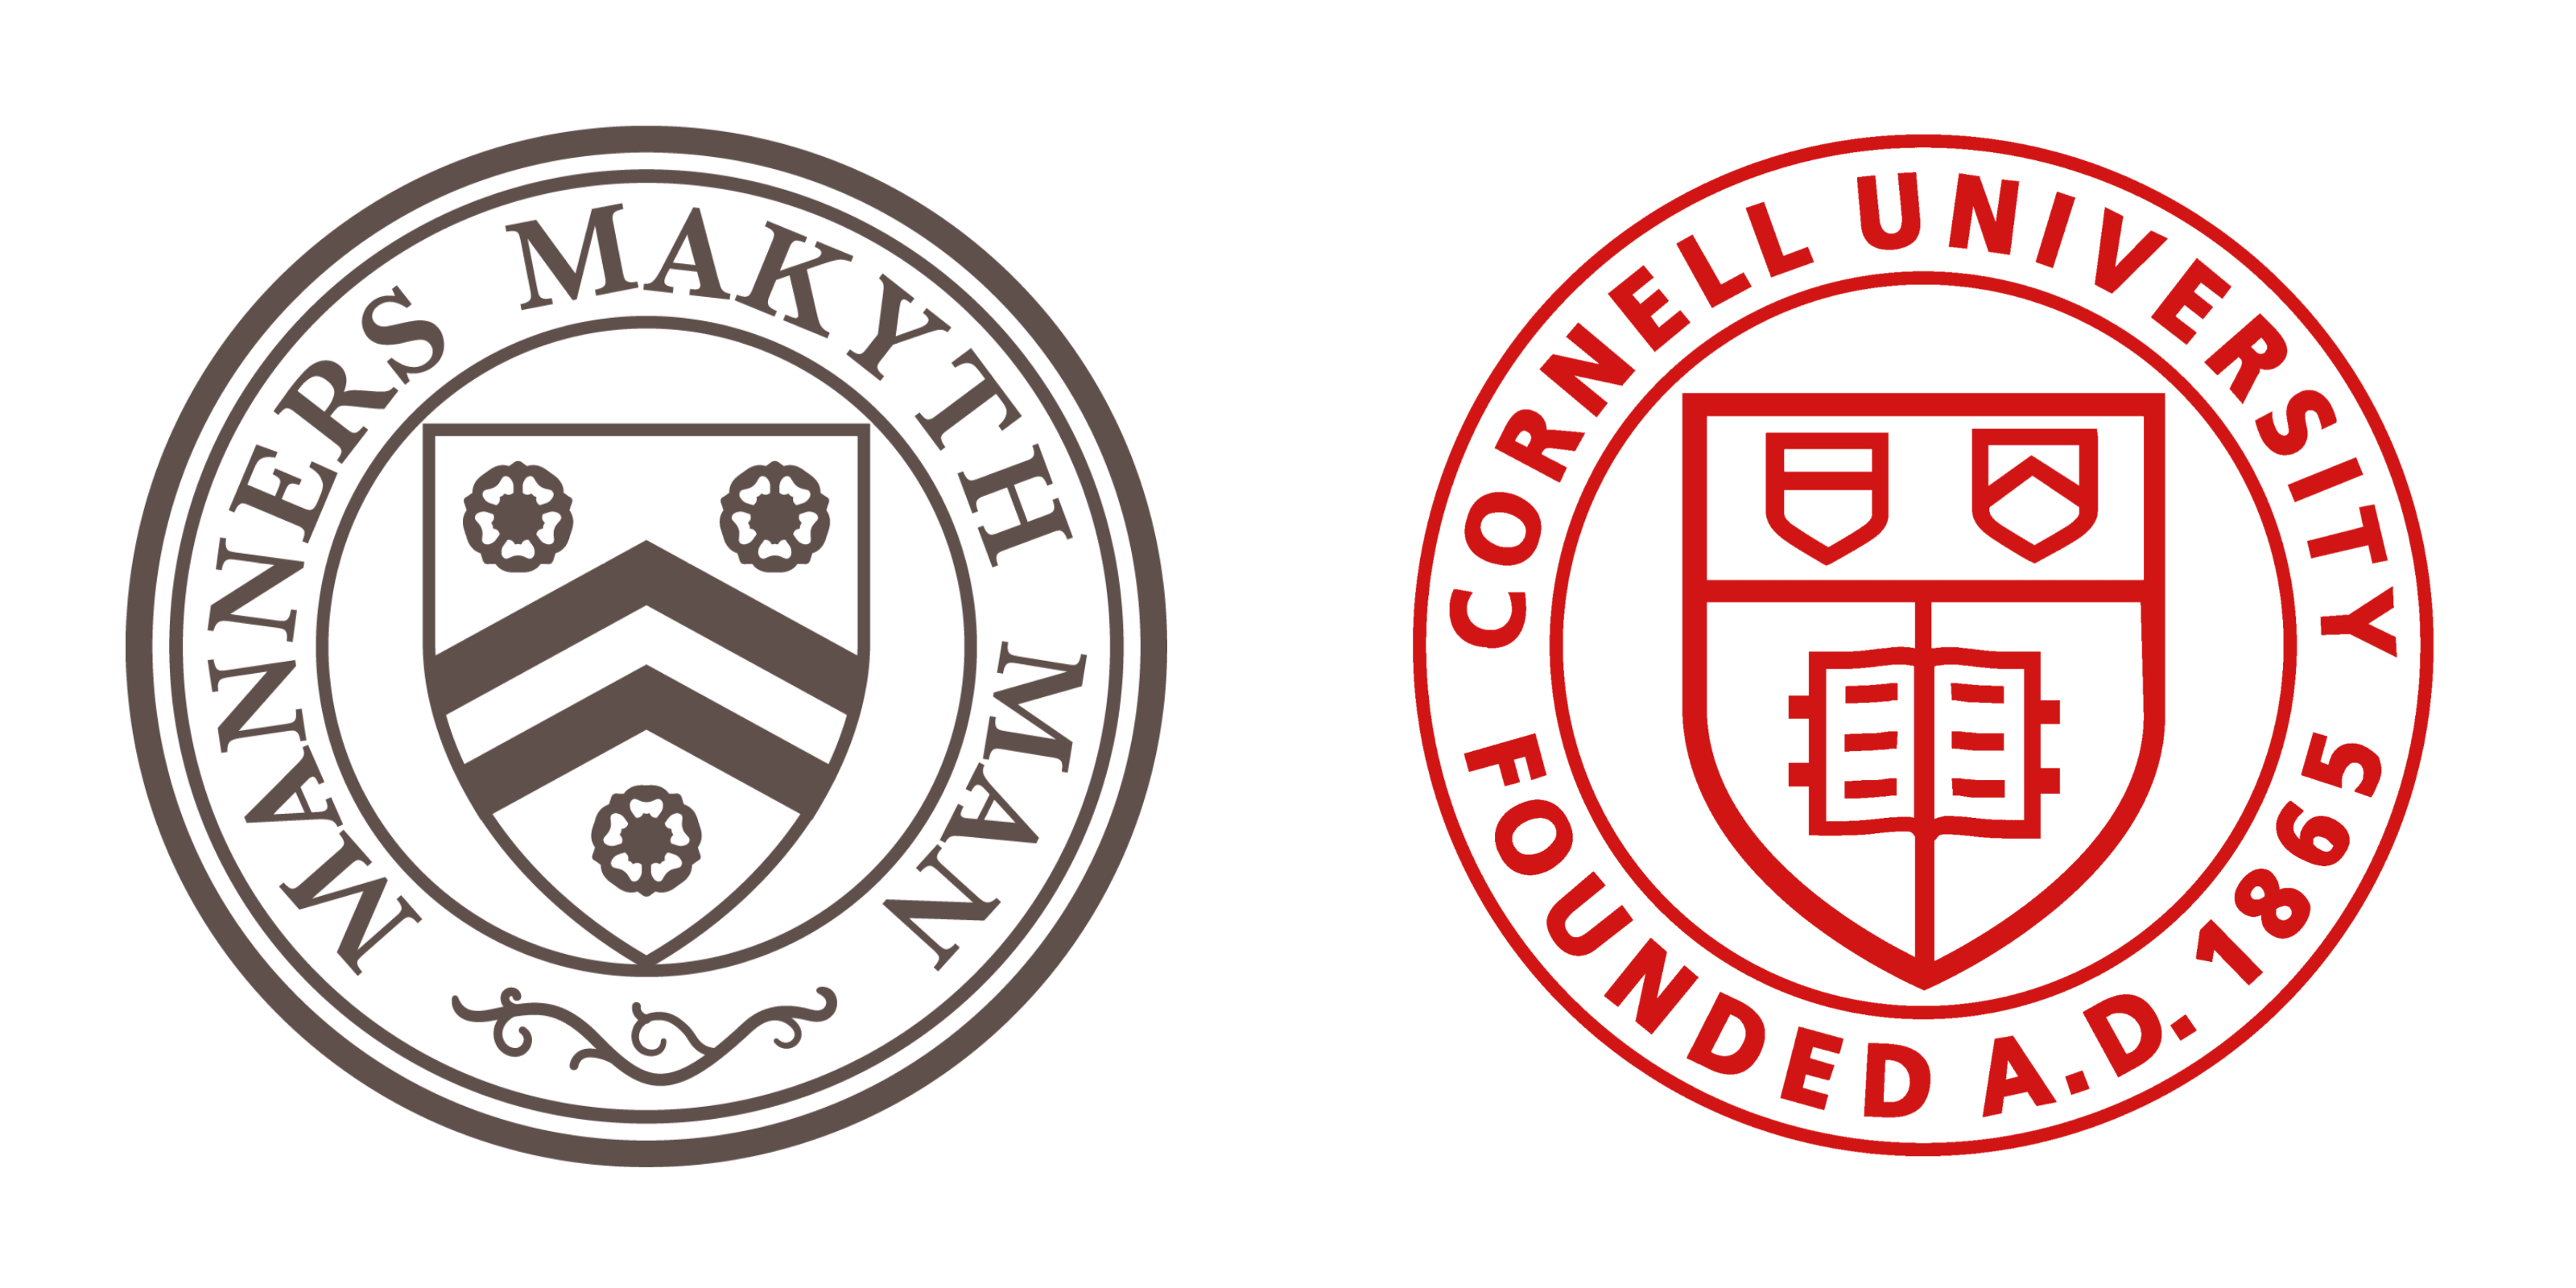 The New College logo and the Cornell University logo